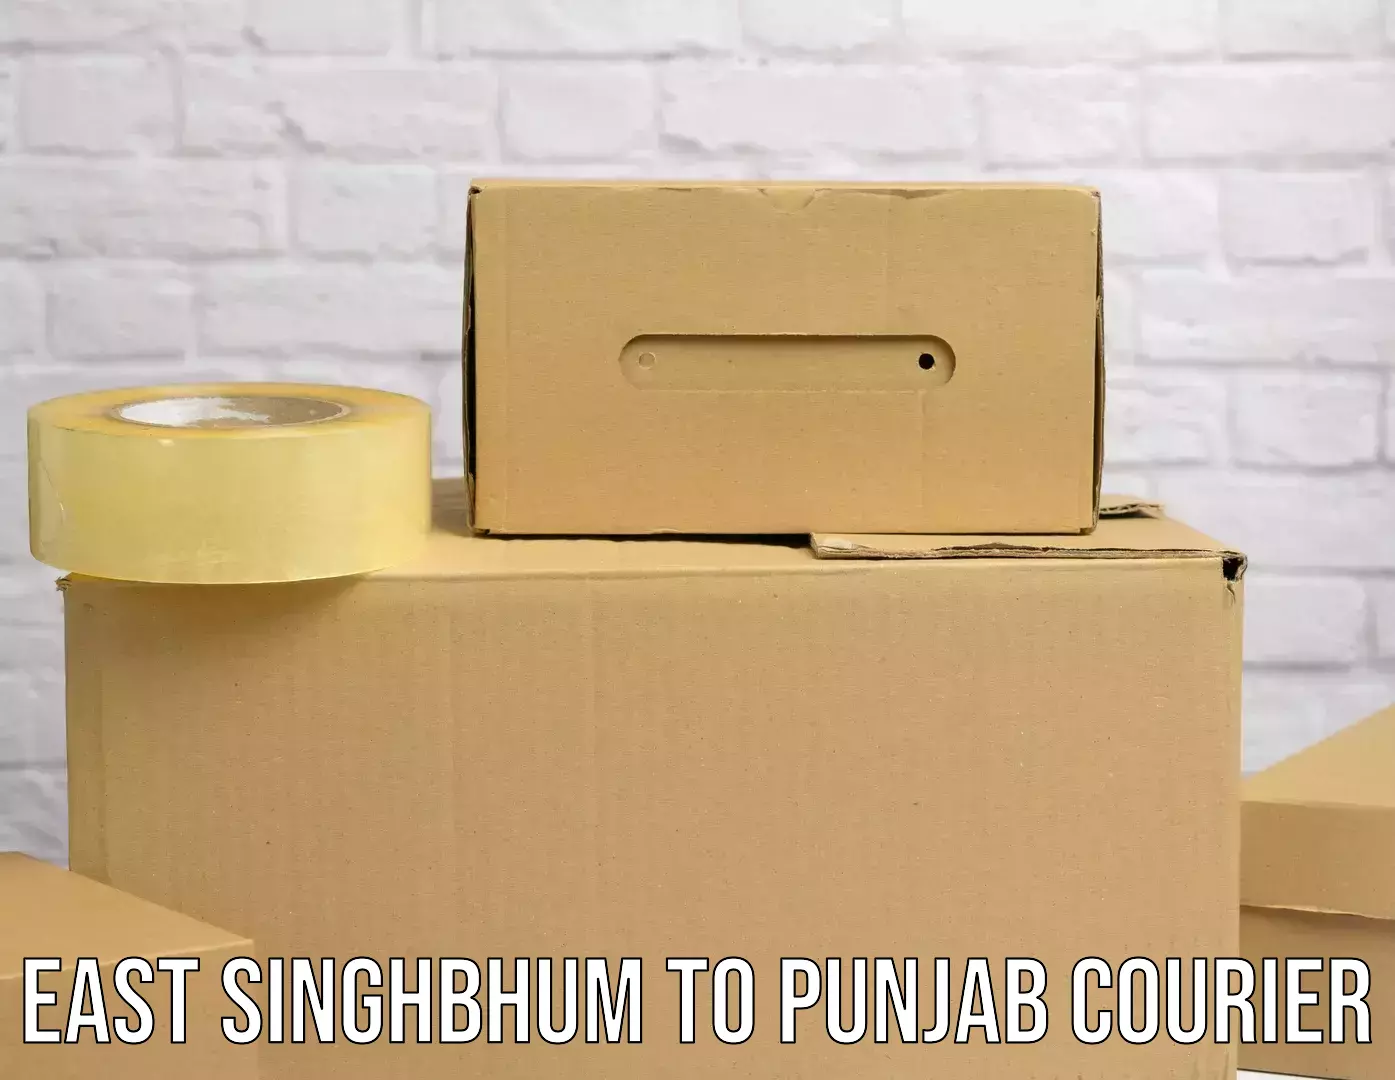 Multi-national courier services East Singhbhum to Goindwal Sahib